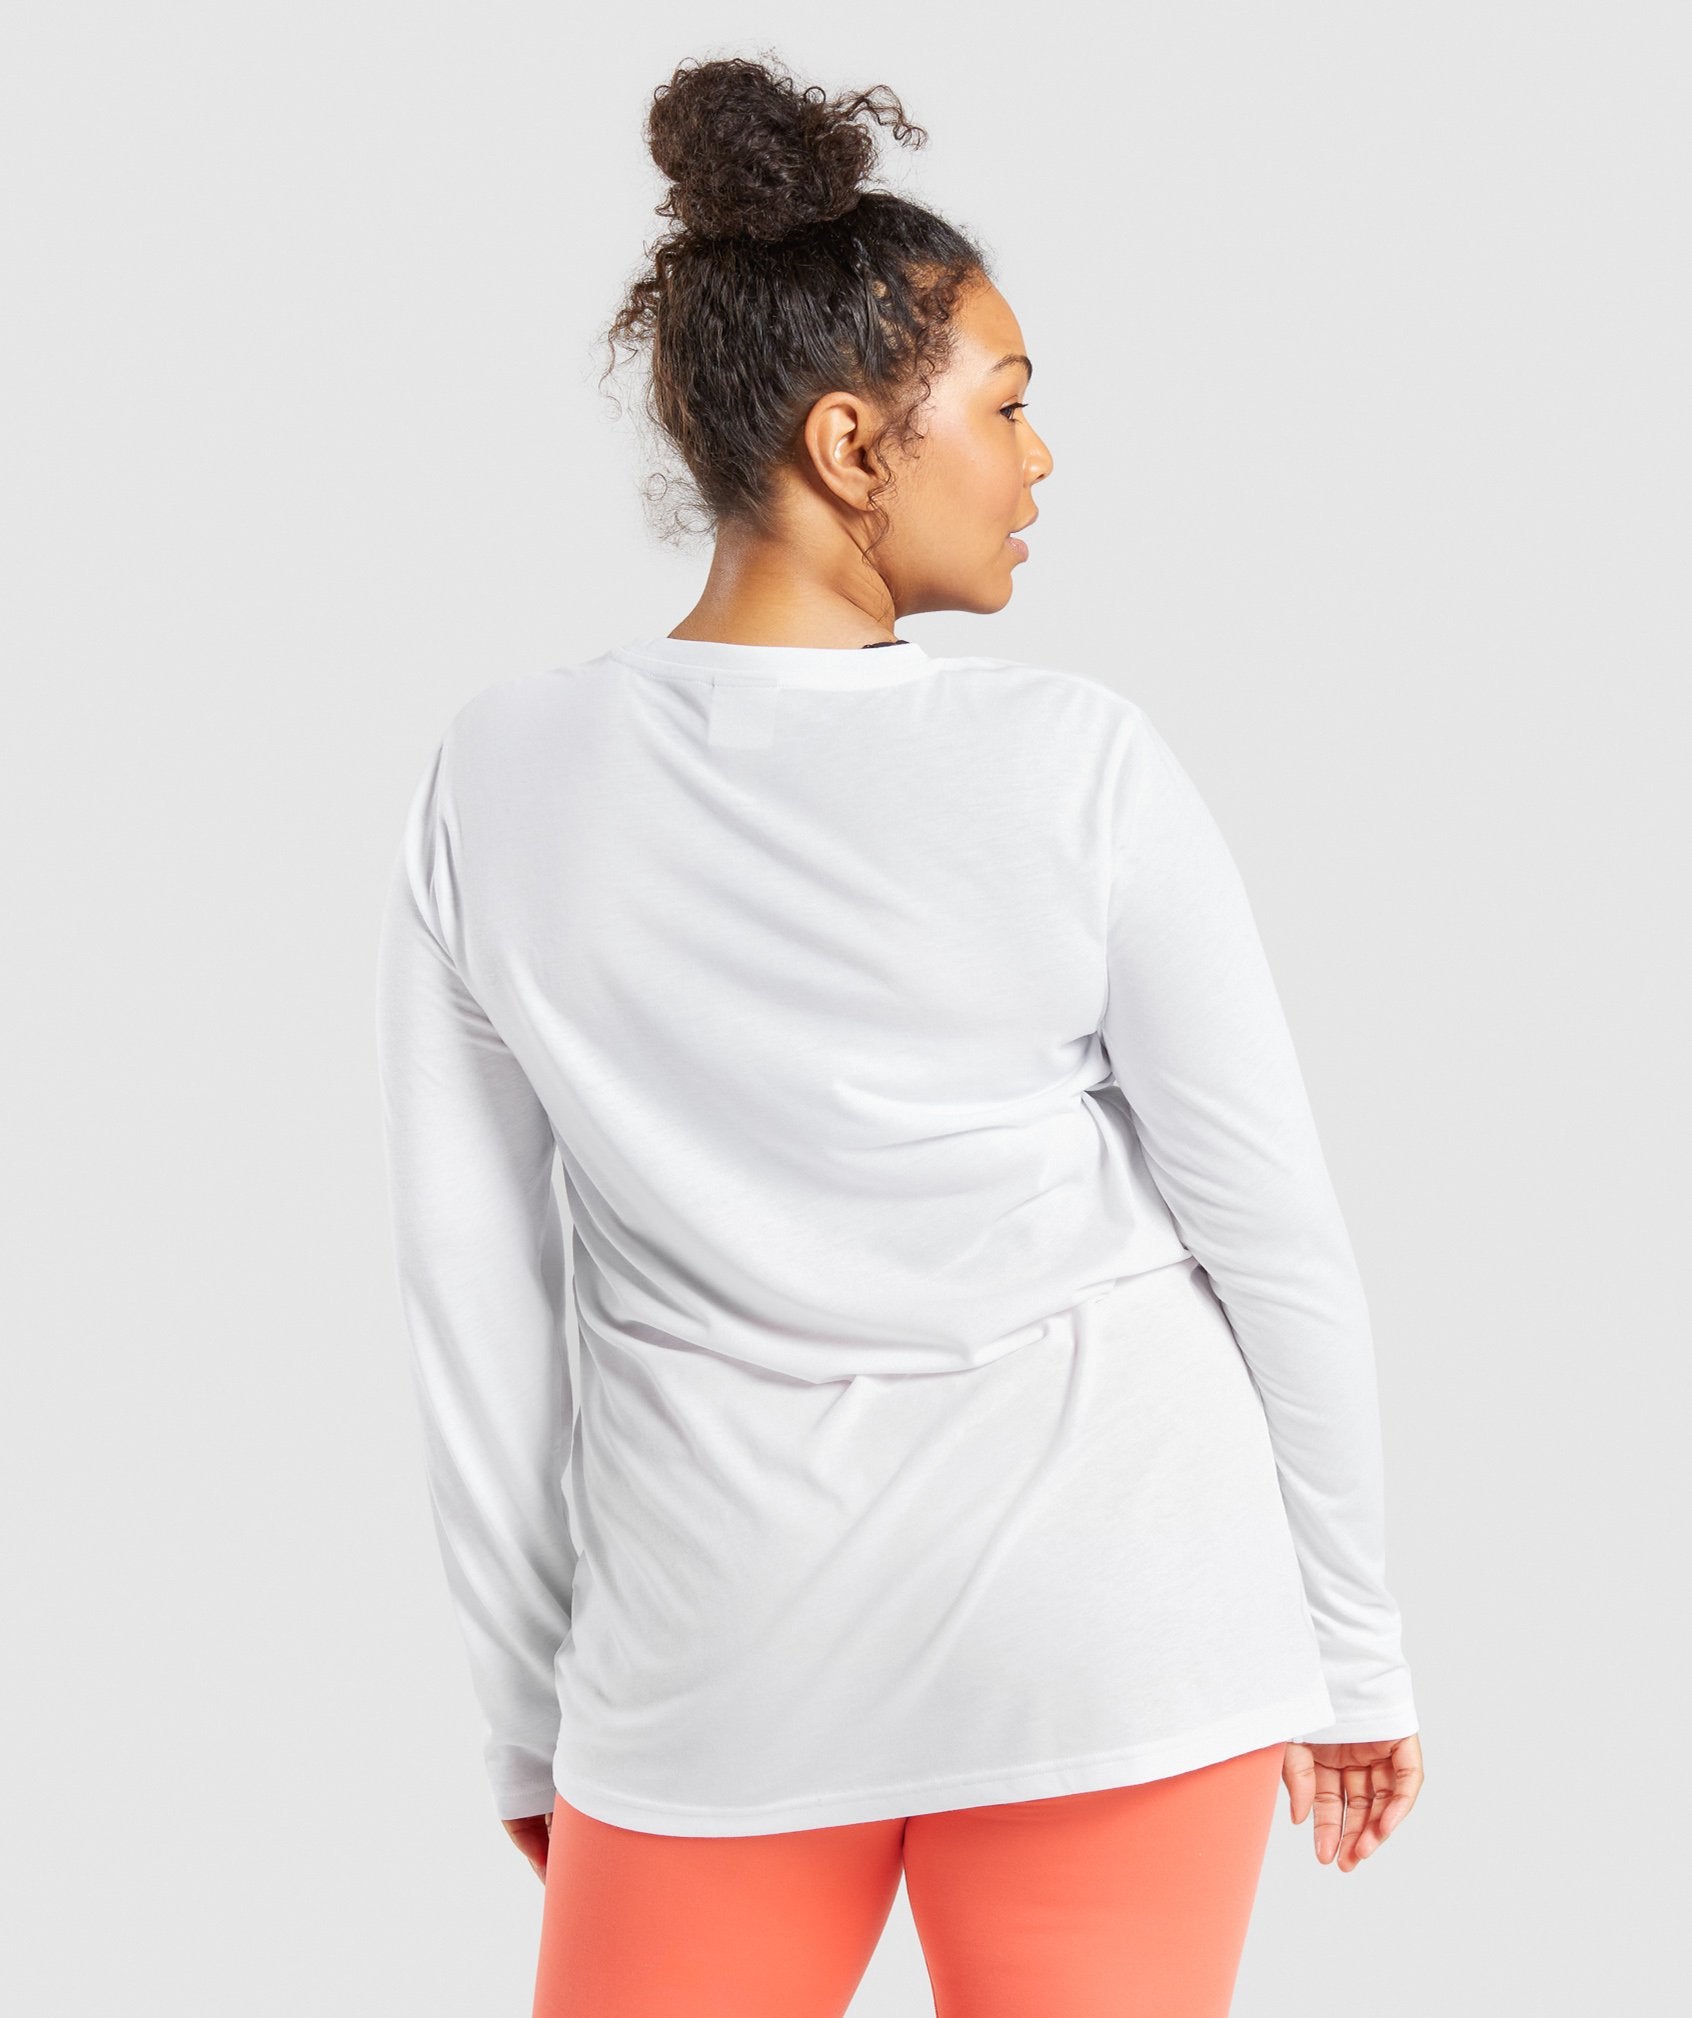 Training Oversized Long Sleeve Tee in White - view 2